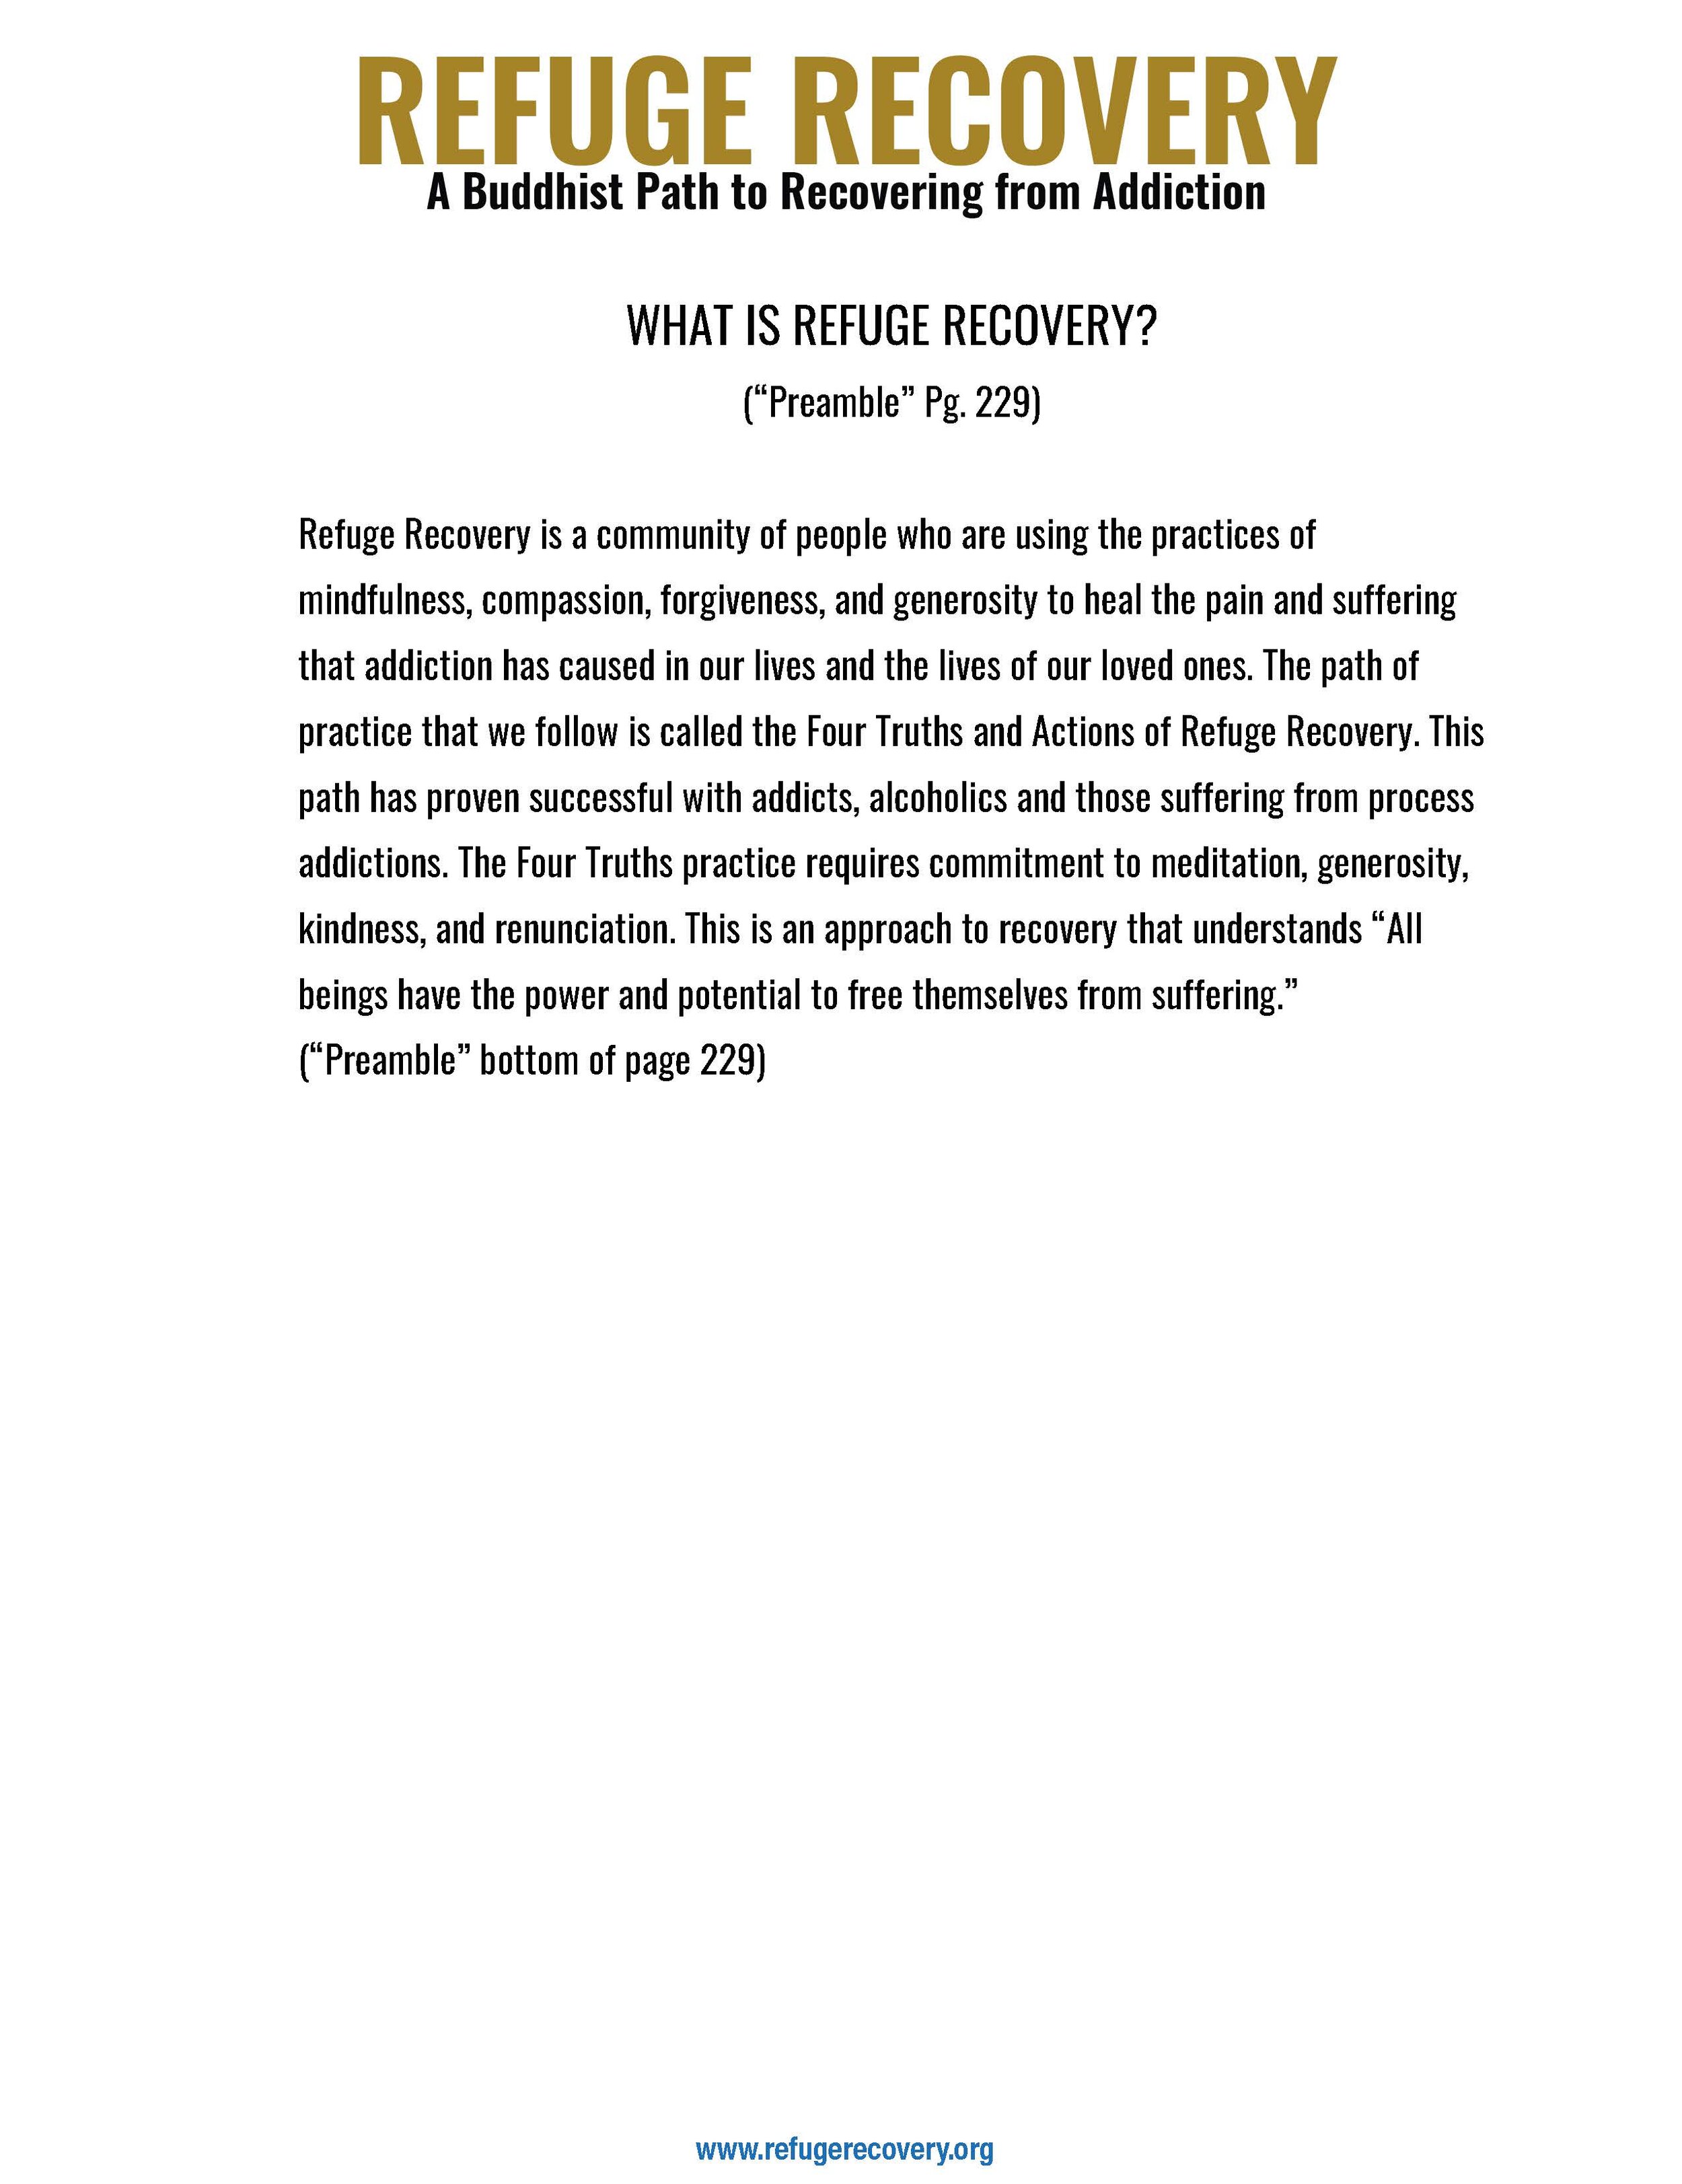 WHAT IS REFUGE RECOVERY (Preamble Pg. 229).jpg